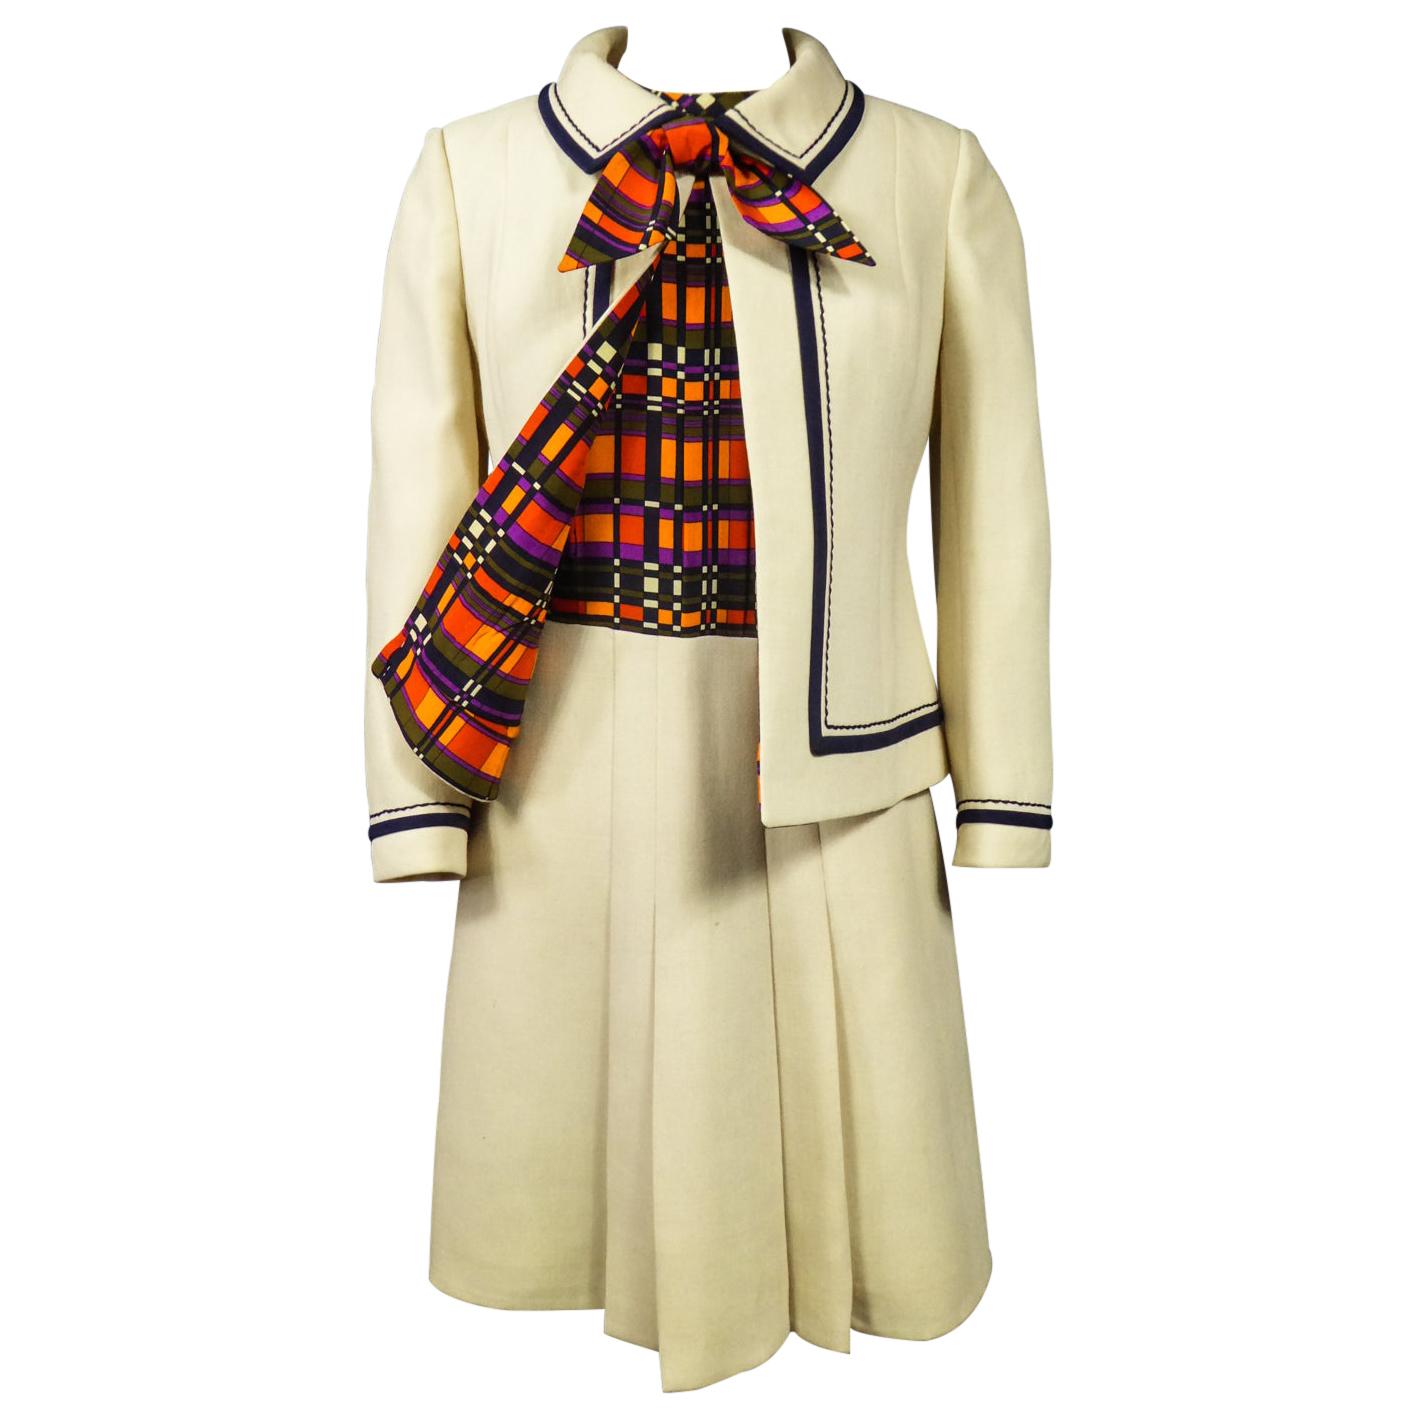 French Couture Dress and Jacket in the style of Balmain Circa 1972